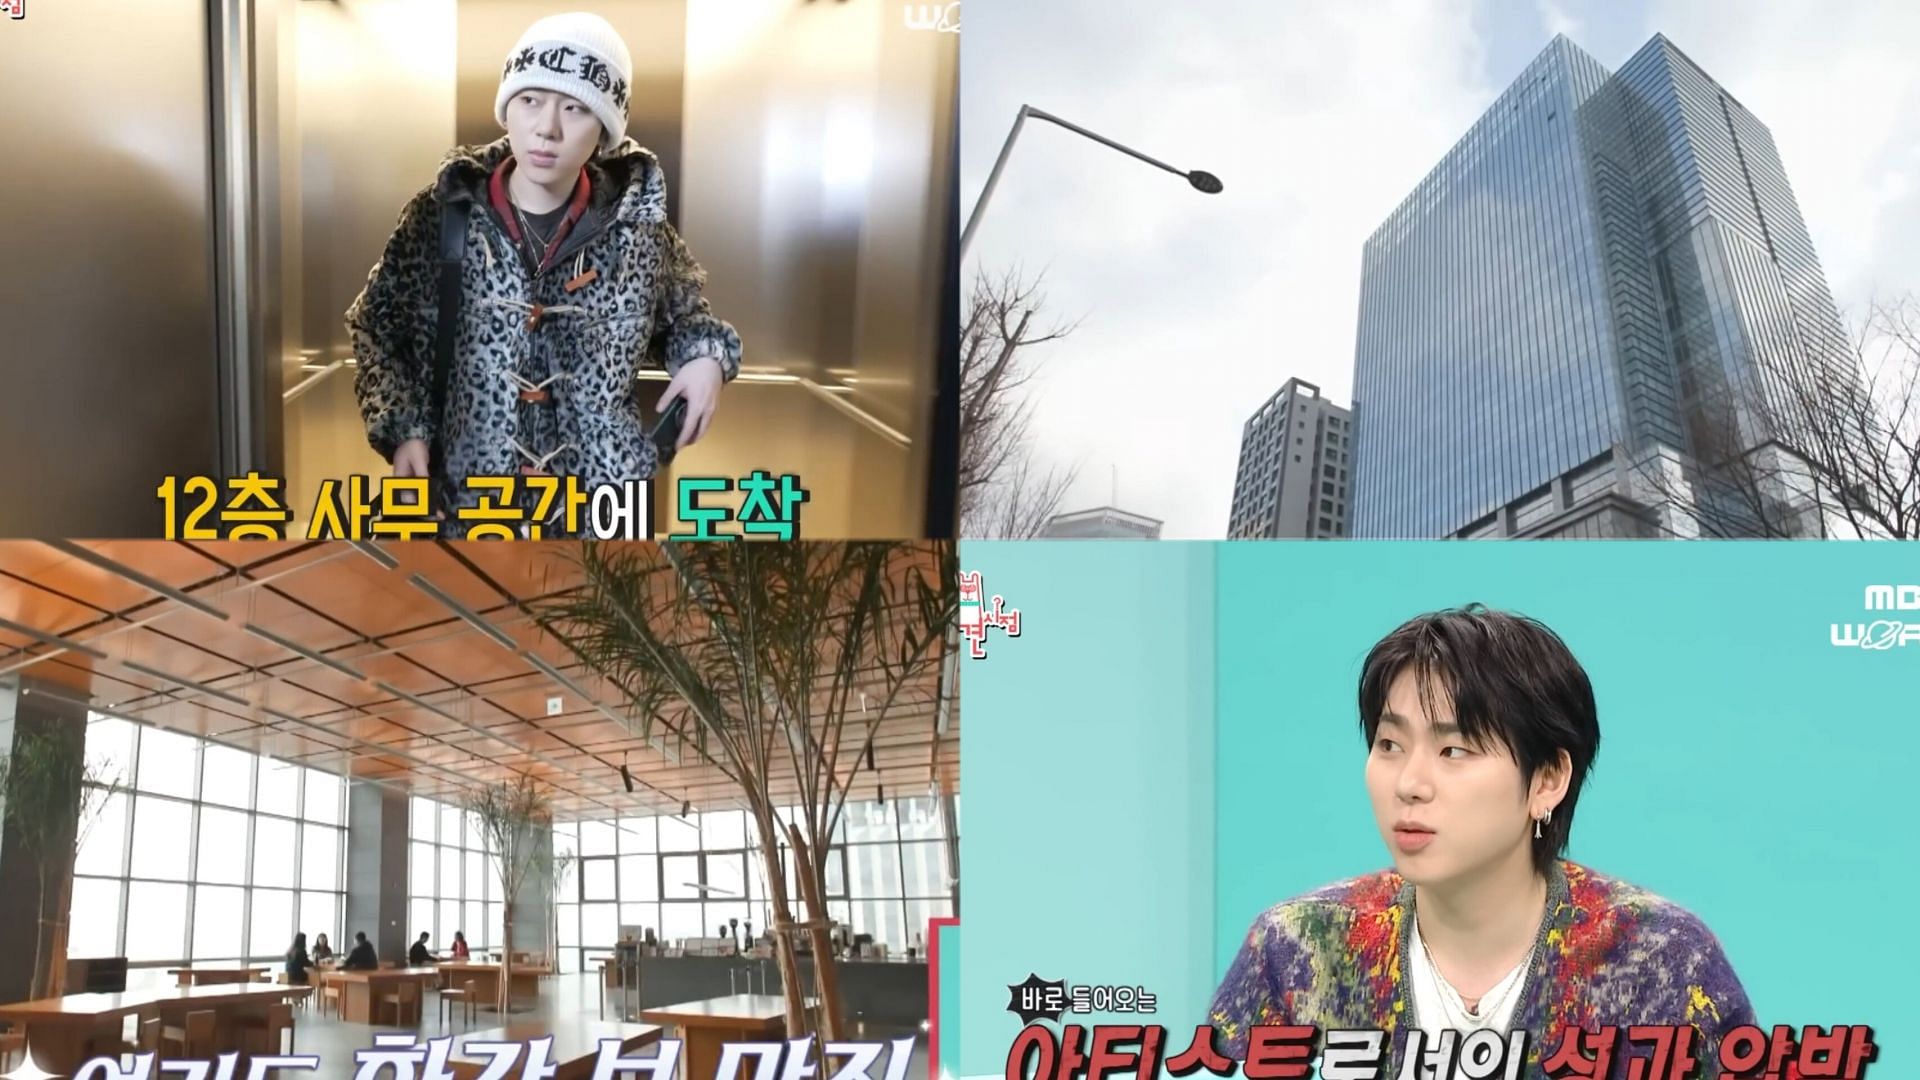 Zico gives a tour of the Hybe building (Images via YouTube/@MBC-WORLD)